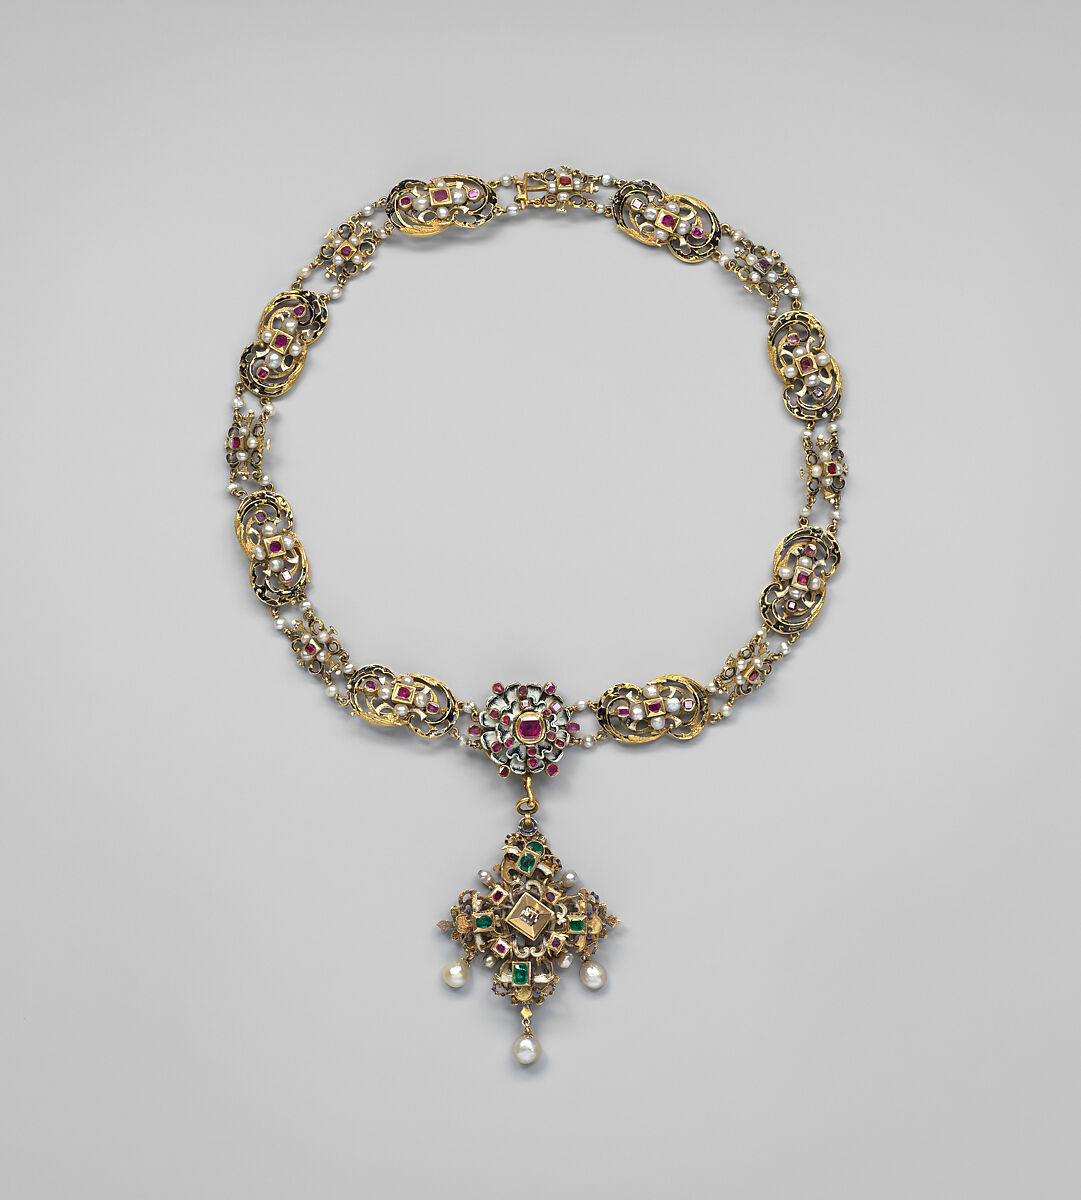 Necklace, Gold, enamel, rubies, seed pearls, pearls and other small precious stones, possibly Southern German